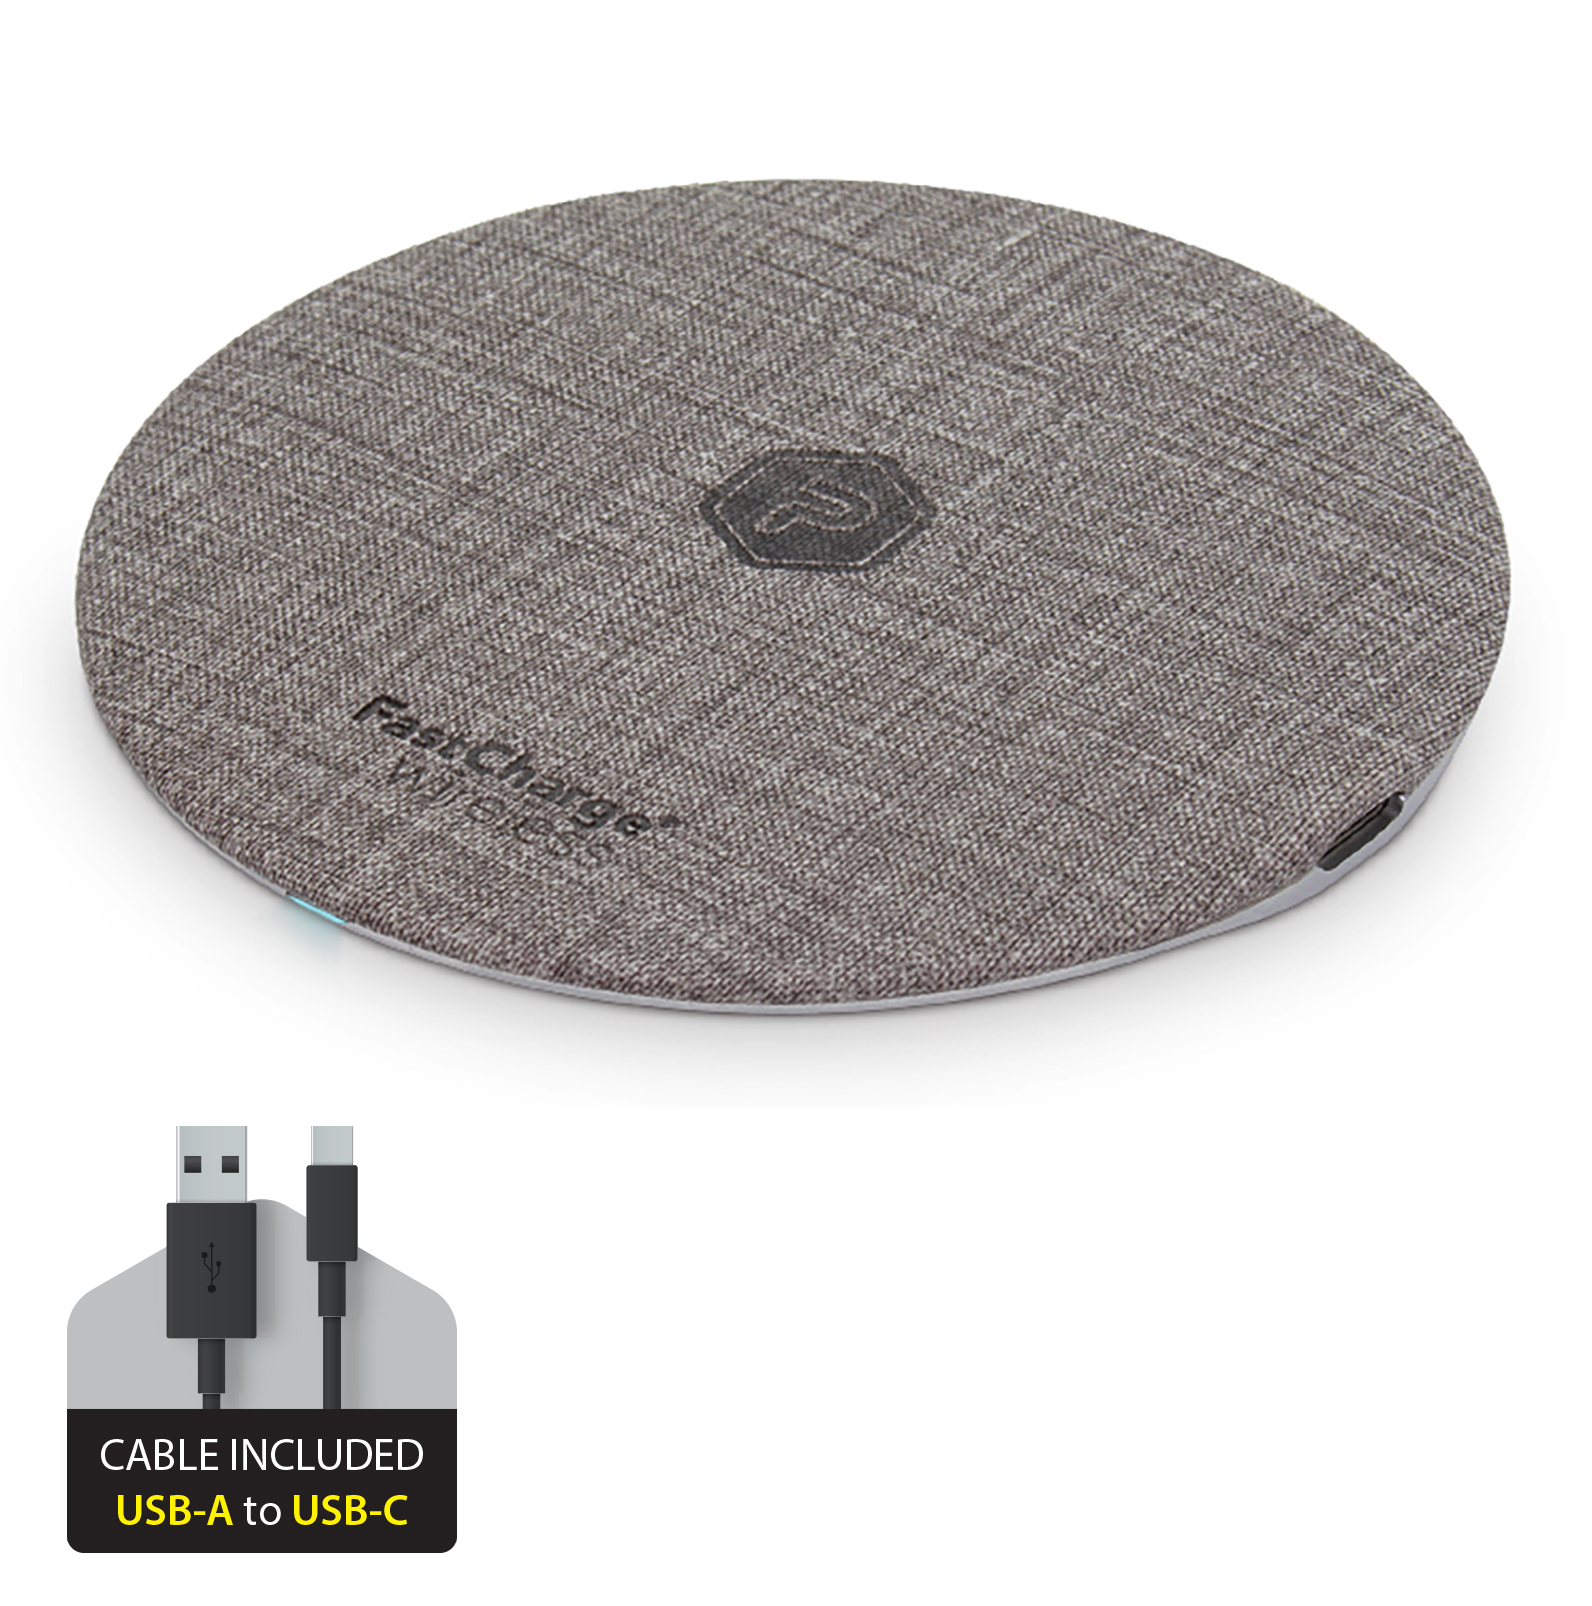 Aluminum circular wireless Pad for Qi-Compatible Devices with USB-A to USB-C Cable Black